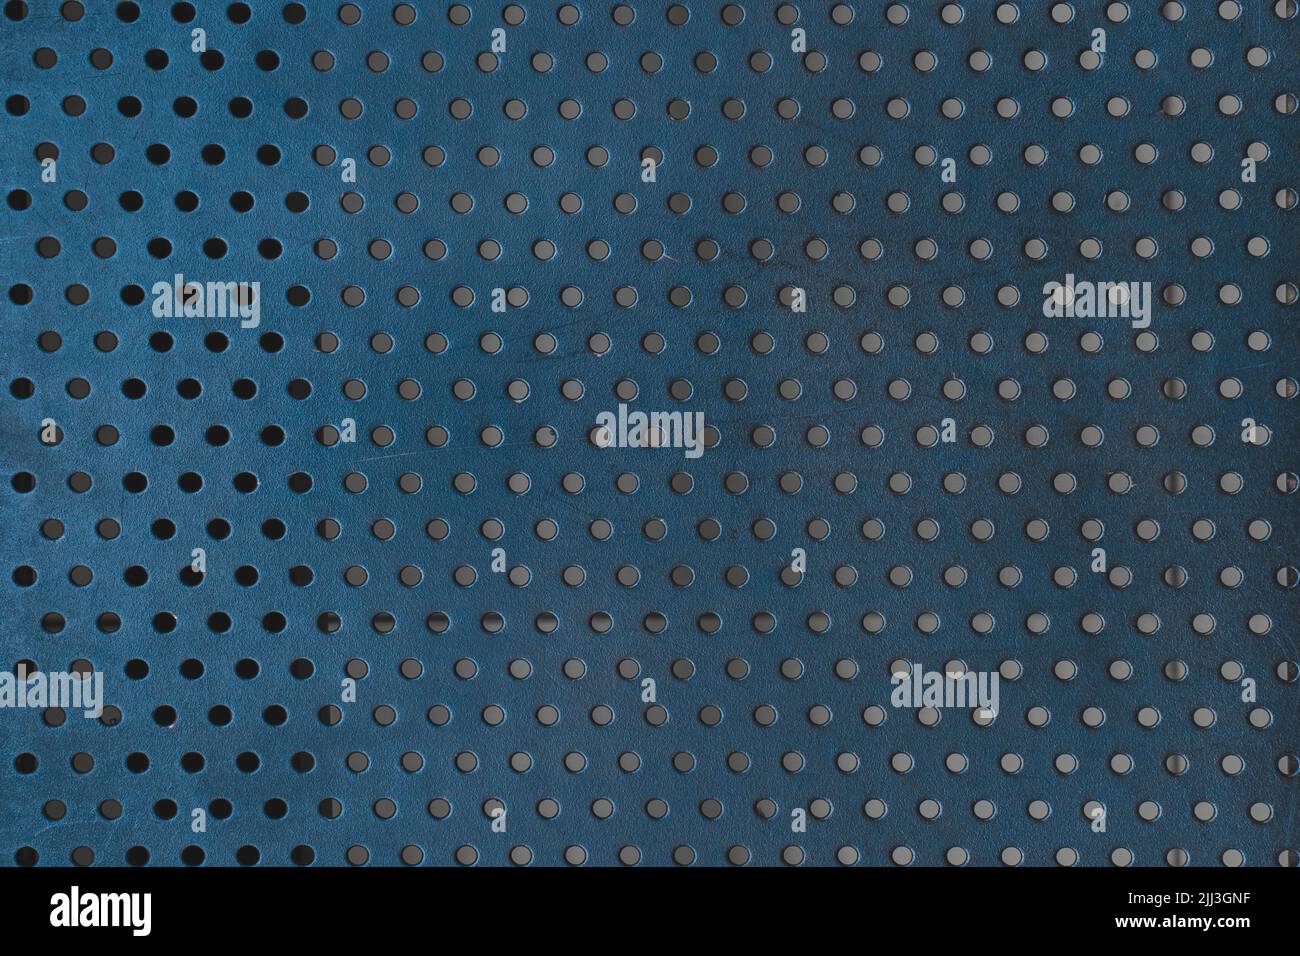 Round Pattern Metal Blue Design Abstract Background Texture Hole Steel Circle Industrial. Stock Photo